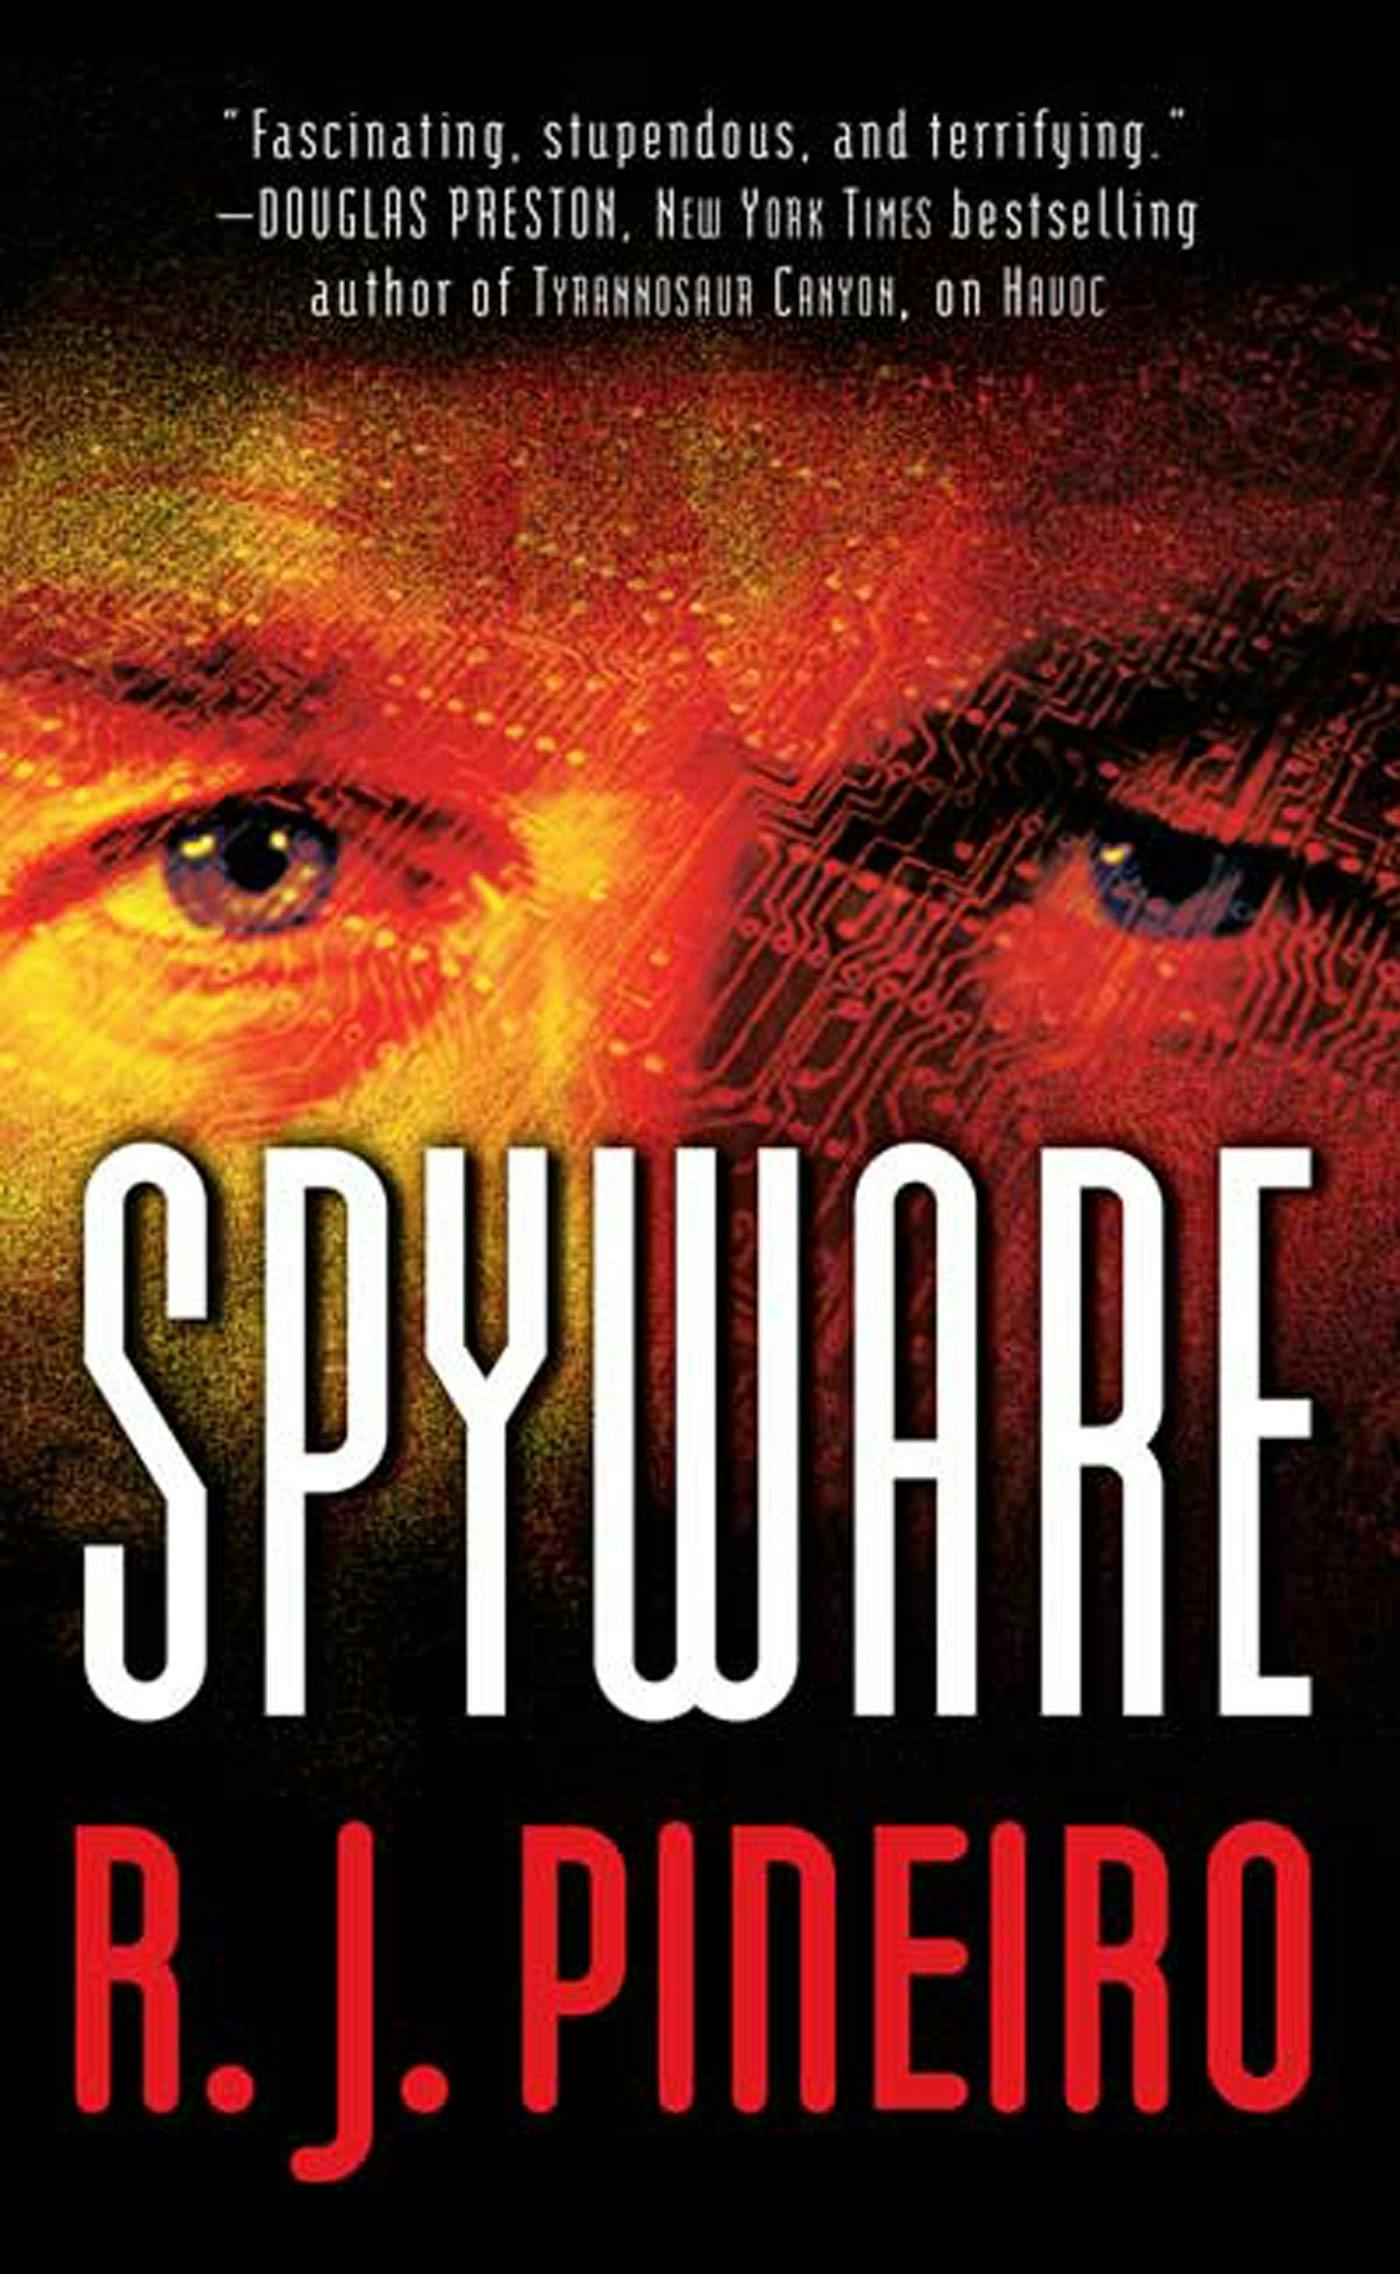 Cover for the book titled as: Spyware